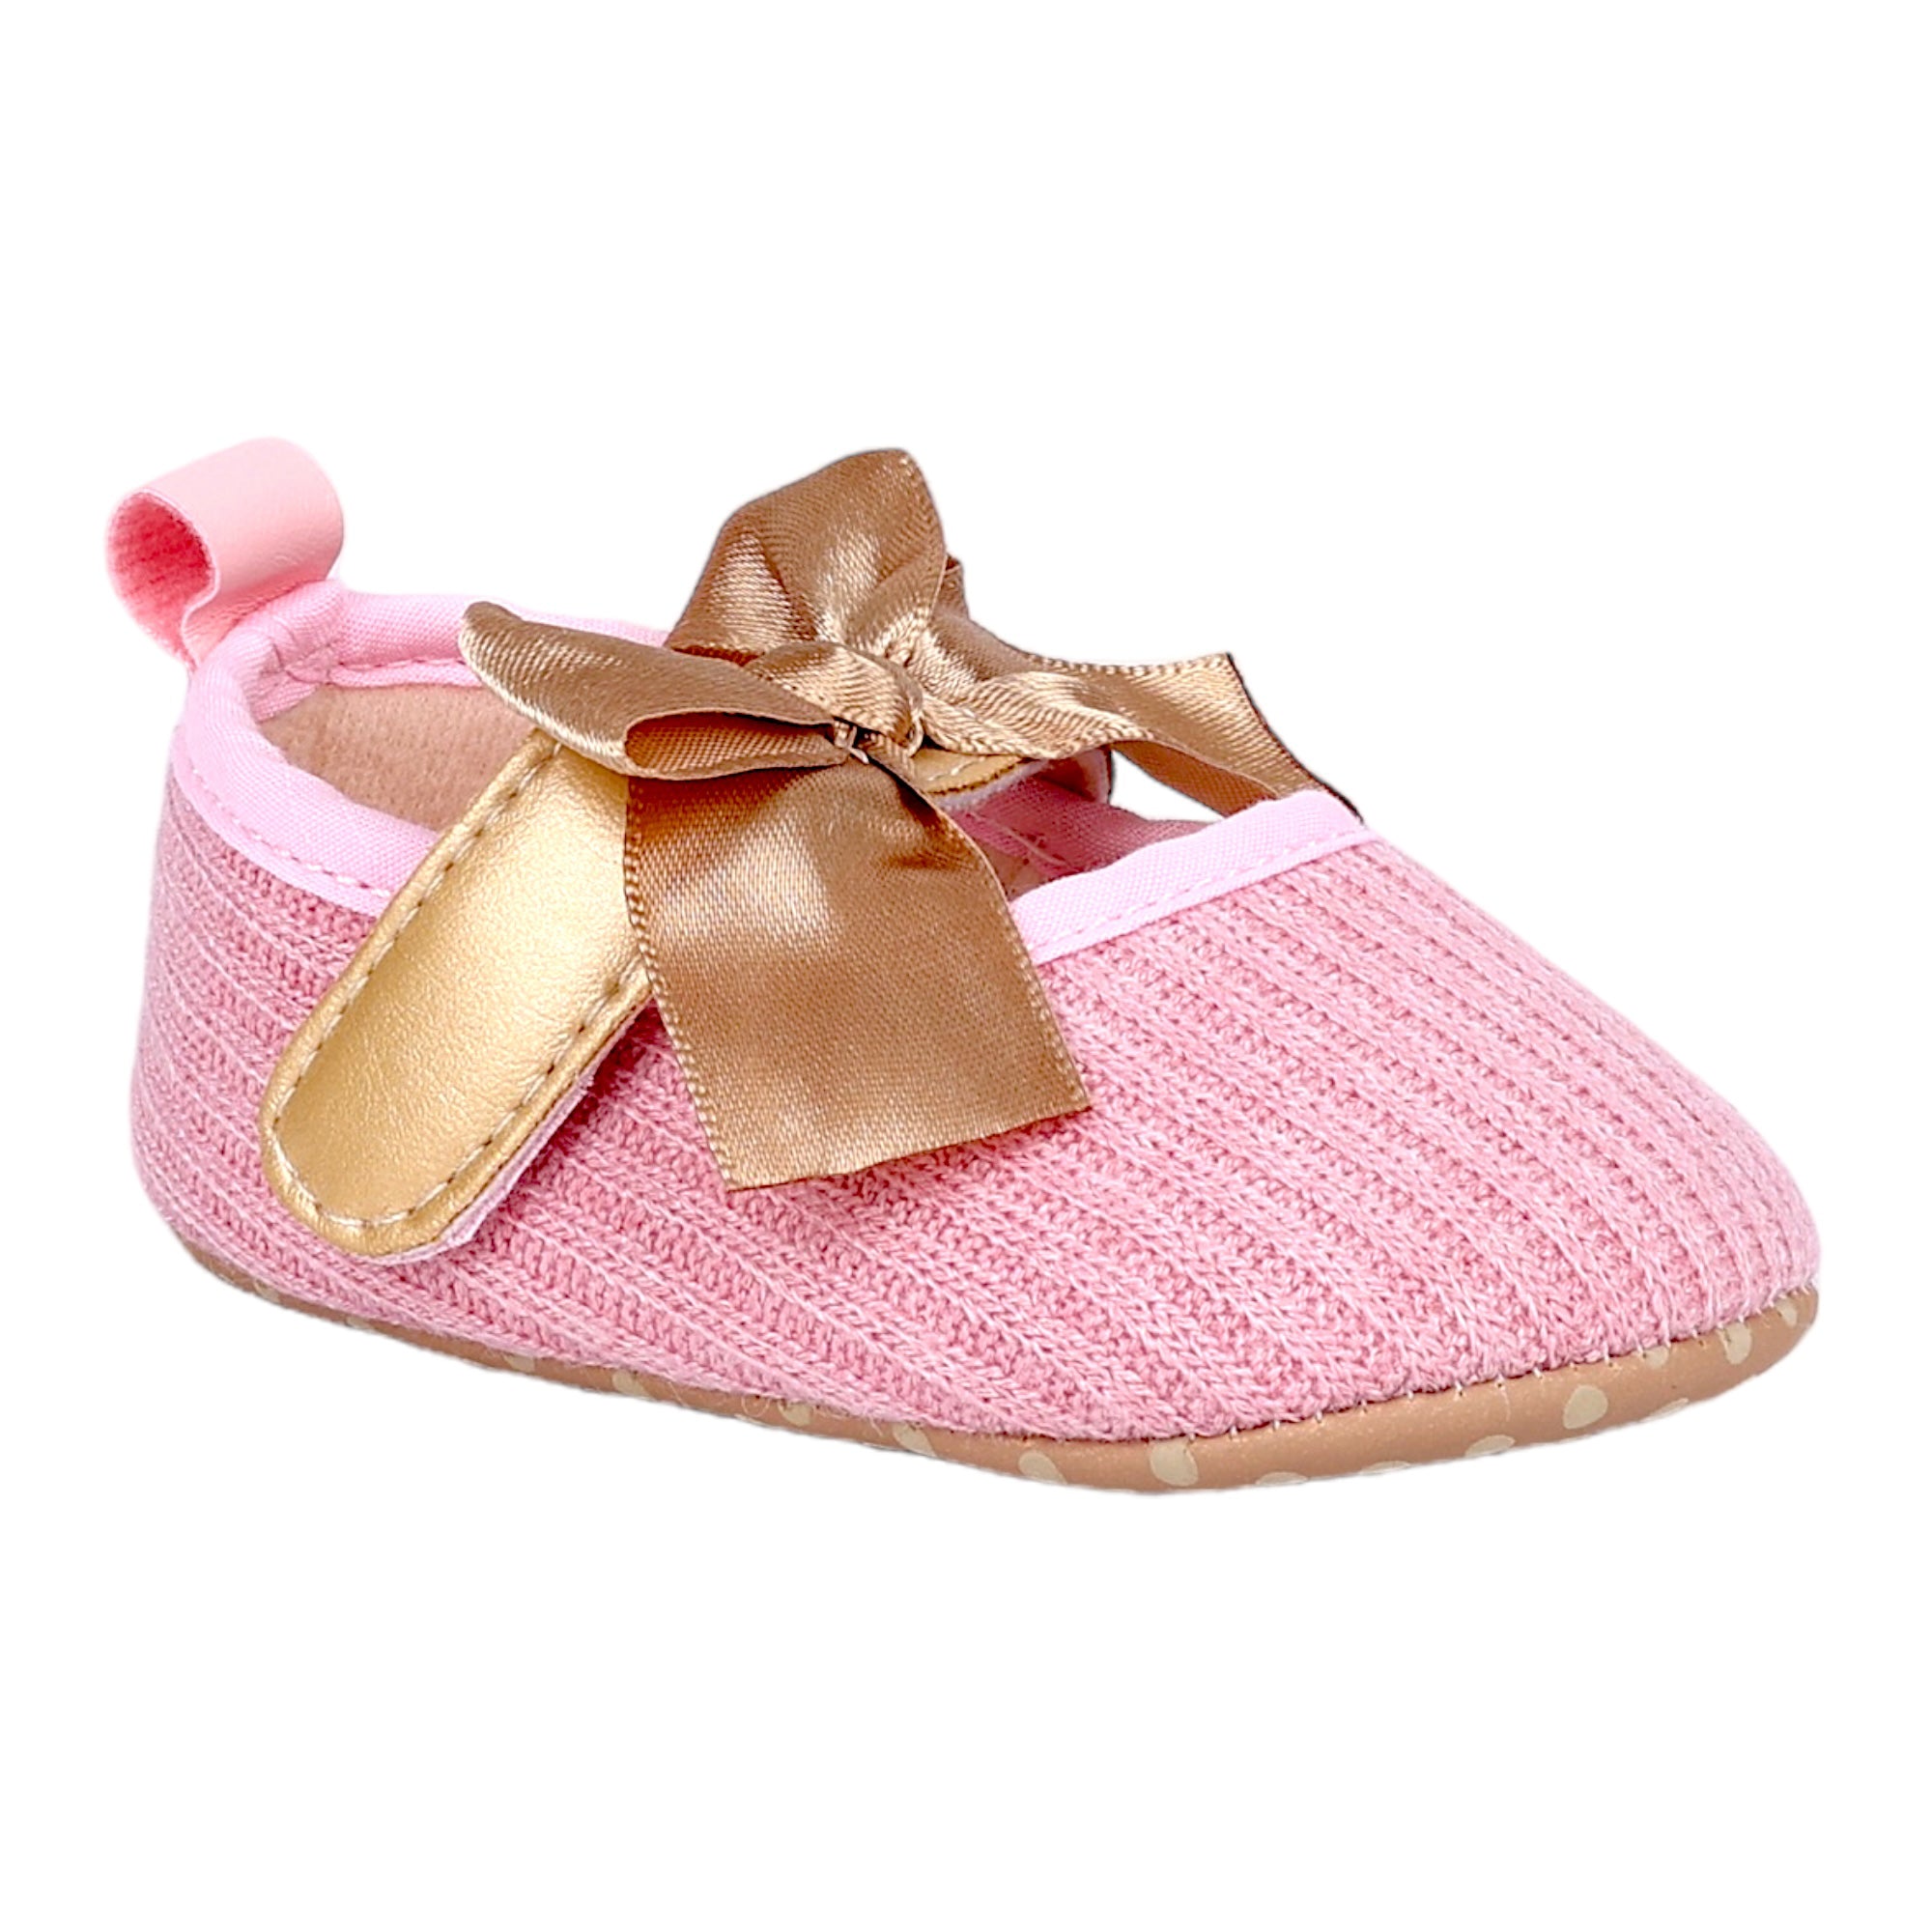 Baby Moo Bow Knot Velcro Strap Ribbed Anti-Skid Ballerina Booties - Pink